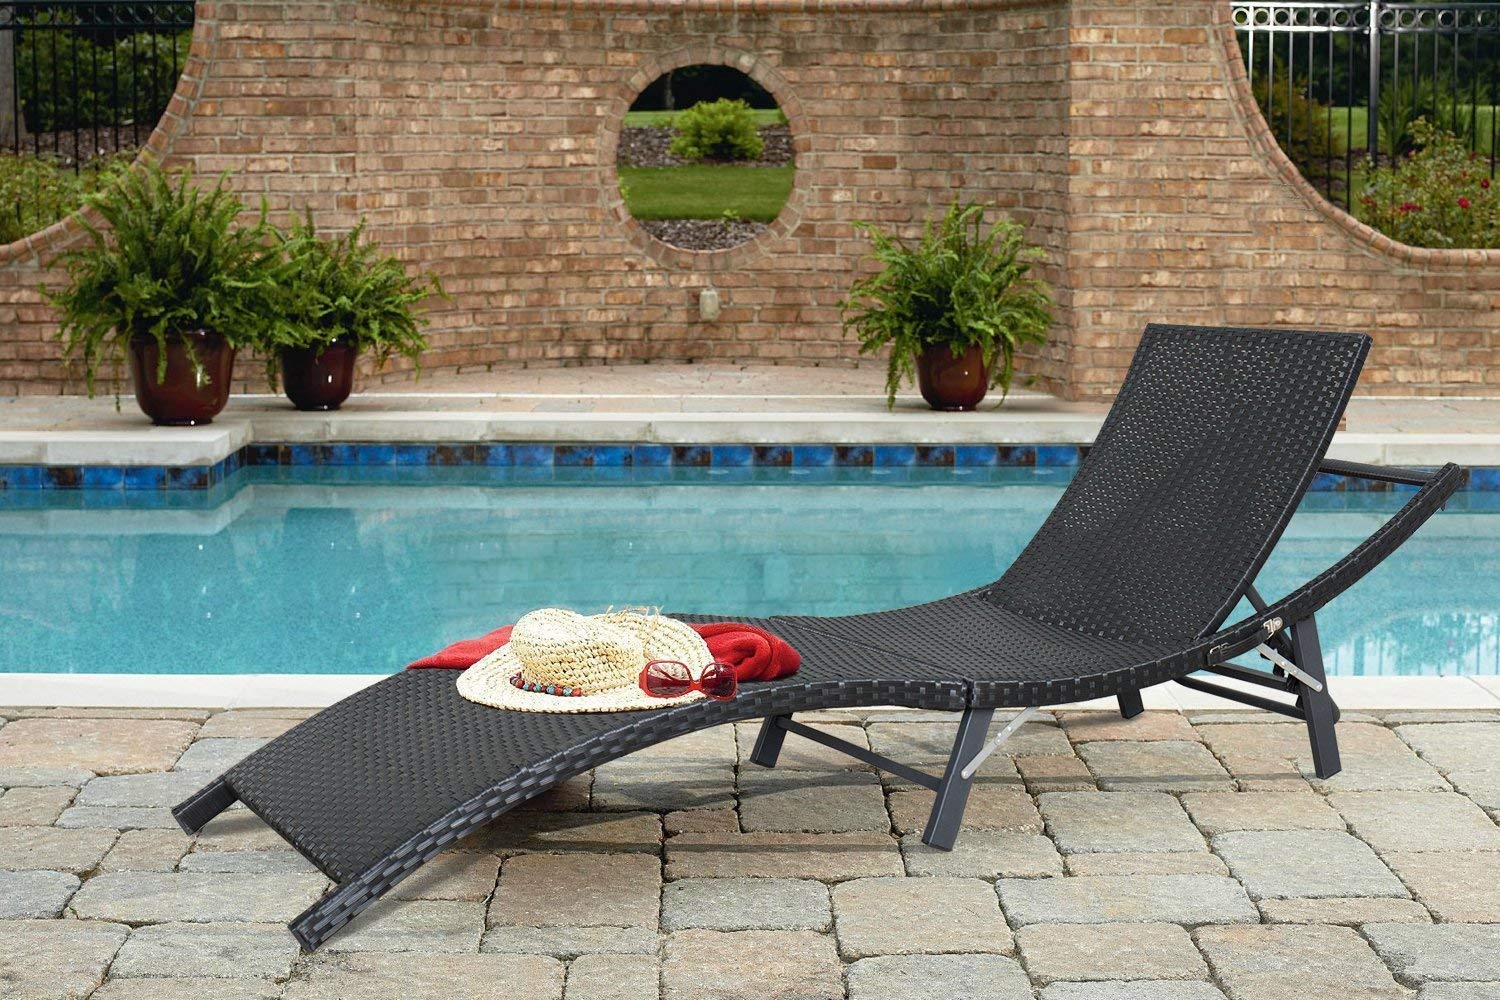 Lacoo 3 Pieces Outdoor Chaise Lounge Chair Patio Furniture Adjustable Folding PE Rattan Lounge Chair, Beige - image 2 of 7